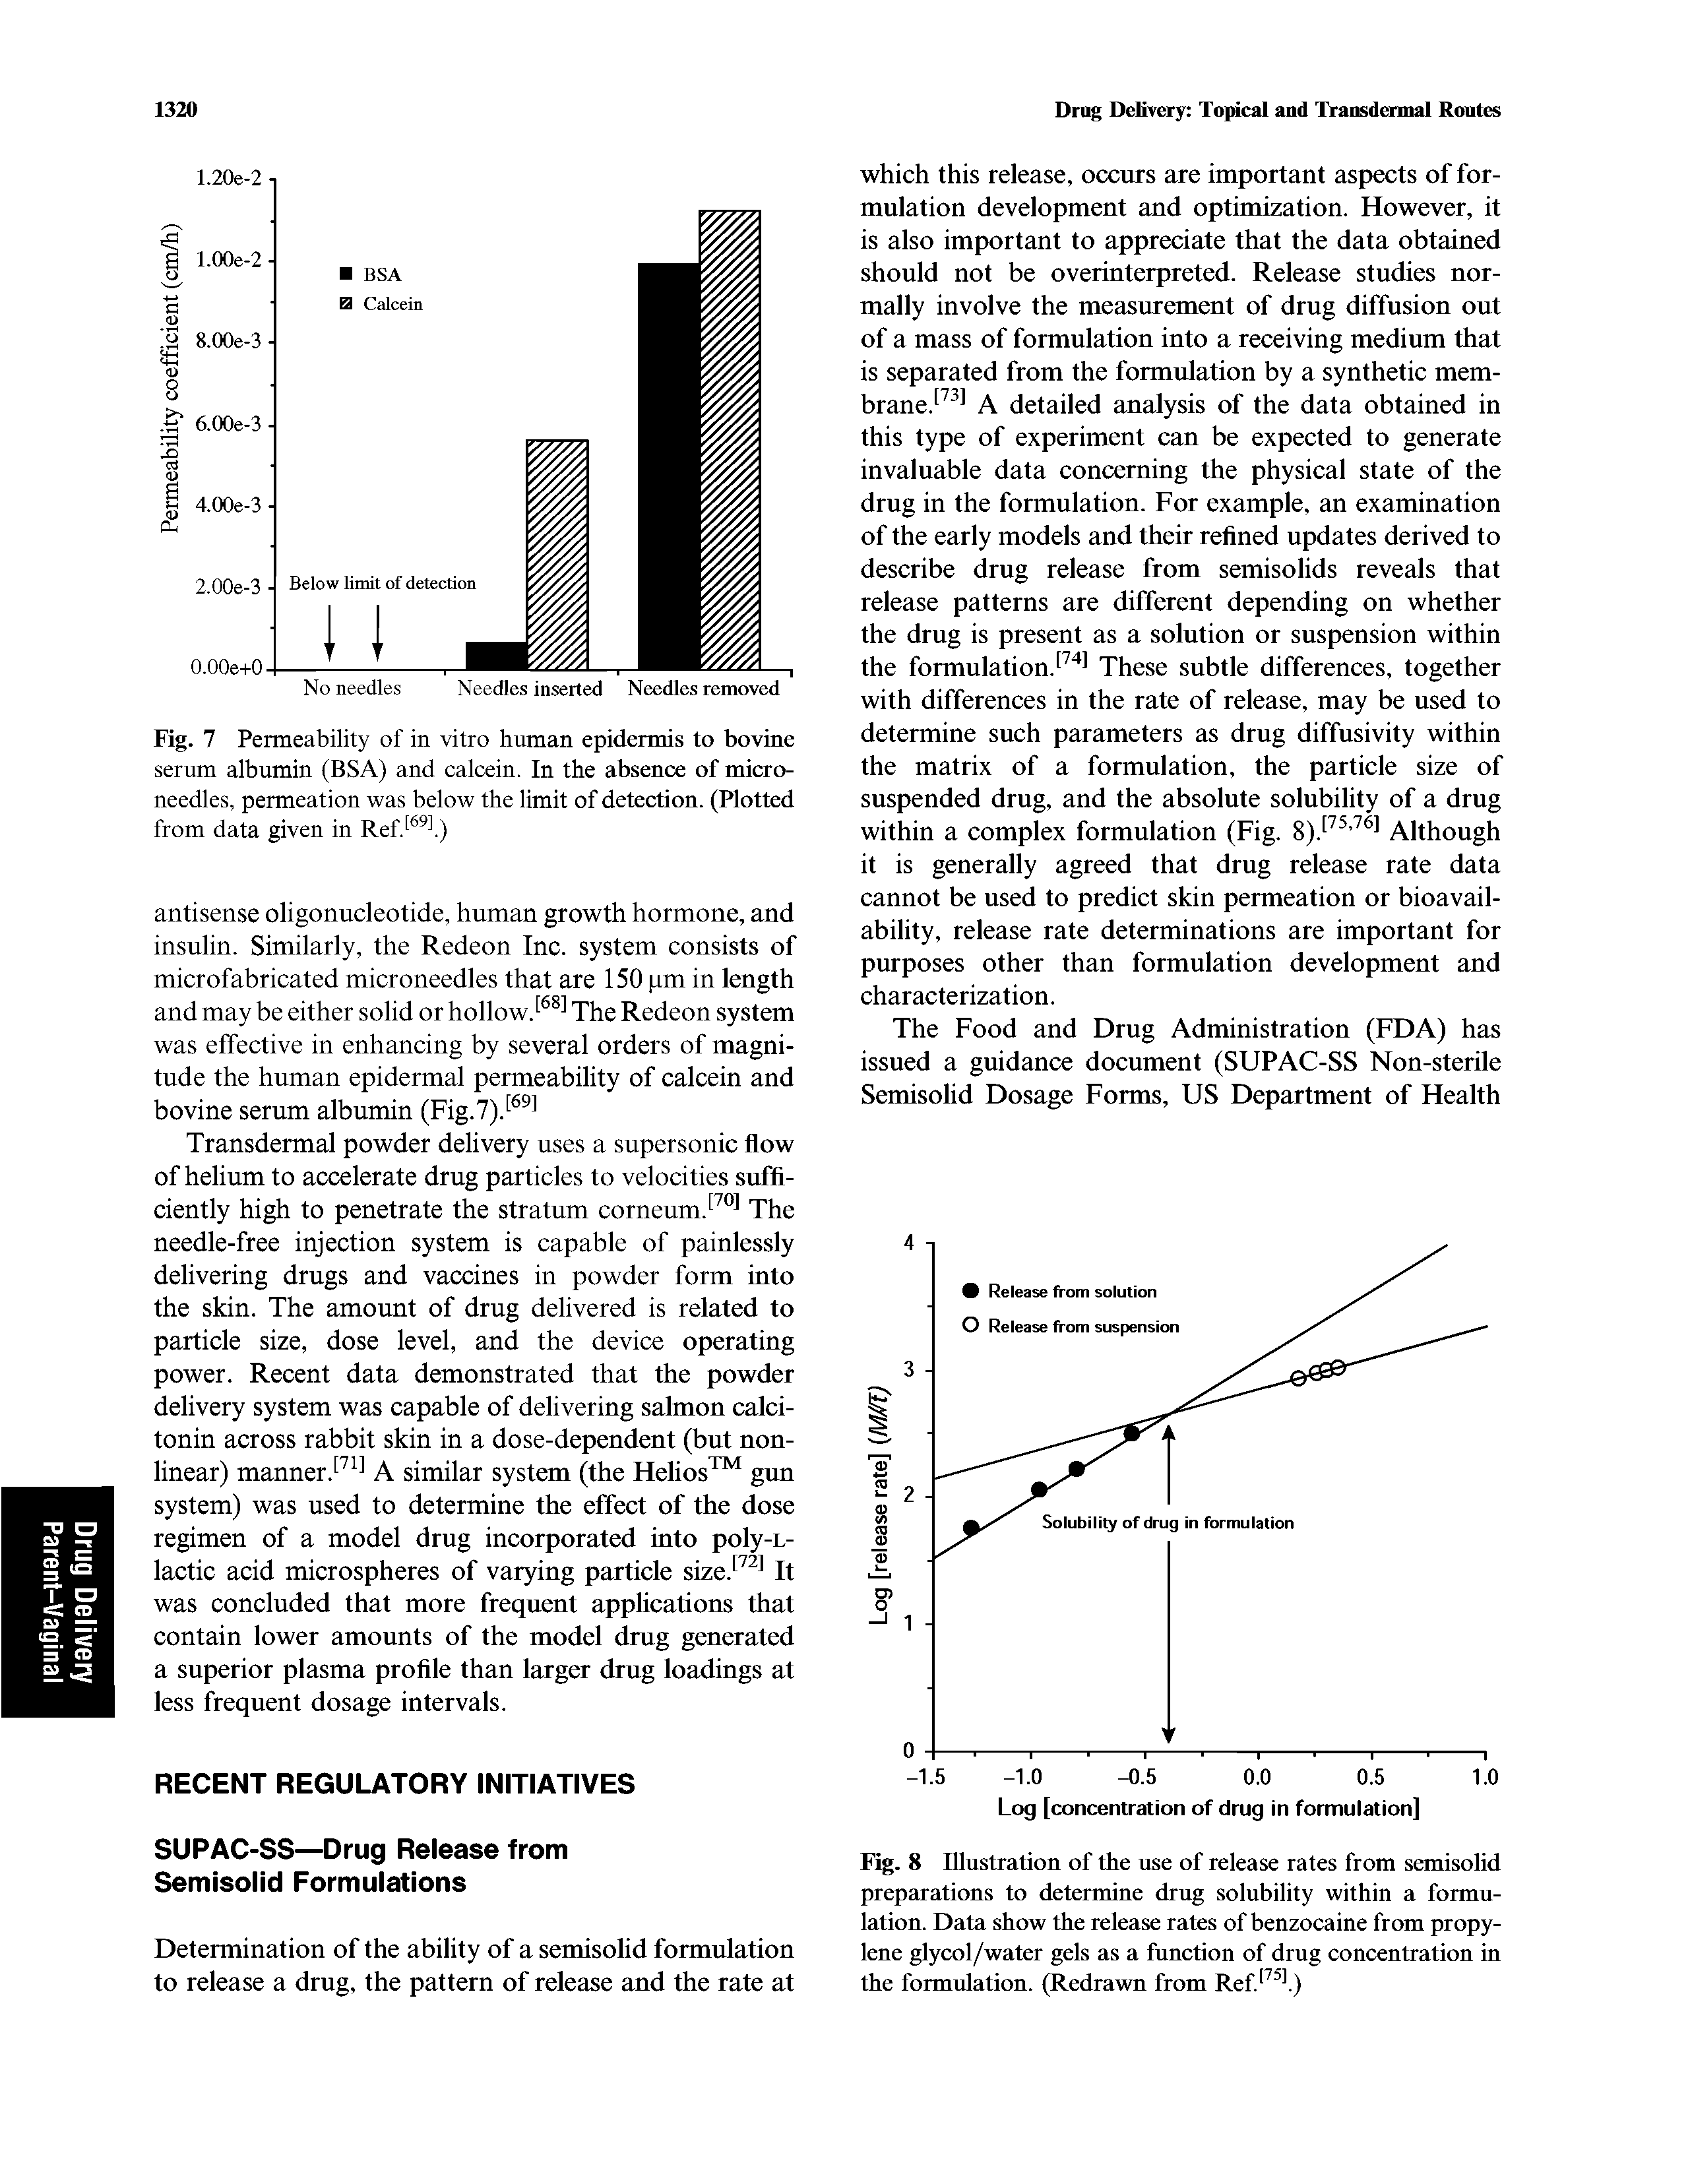 Fig. 8 Illustration of the use of release rates from semisolid preparations to determine drug solubility within a formulation. Data show the release rates of benzocaine from propylene glycol/water gels as a function of drug concentration in the formulation. (Redrawn from Ref...